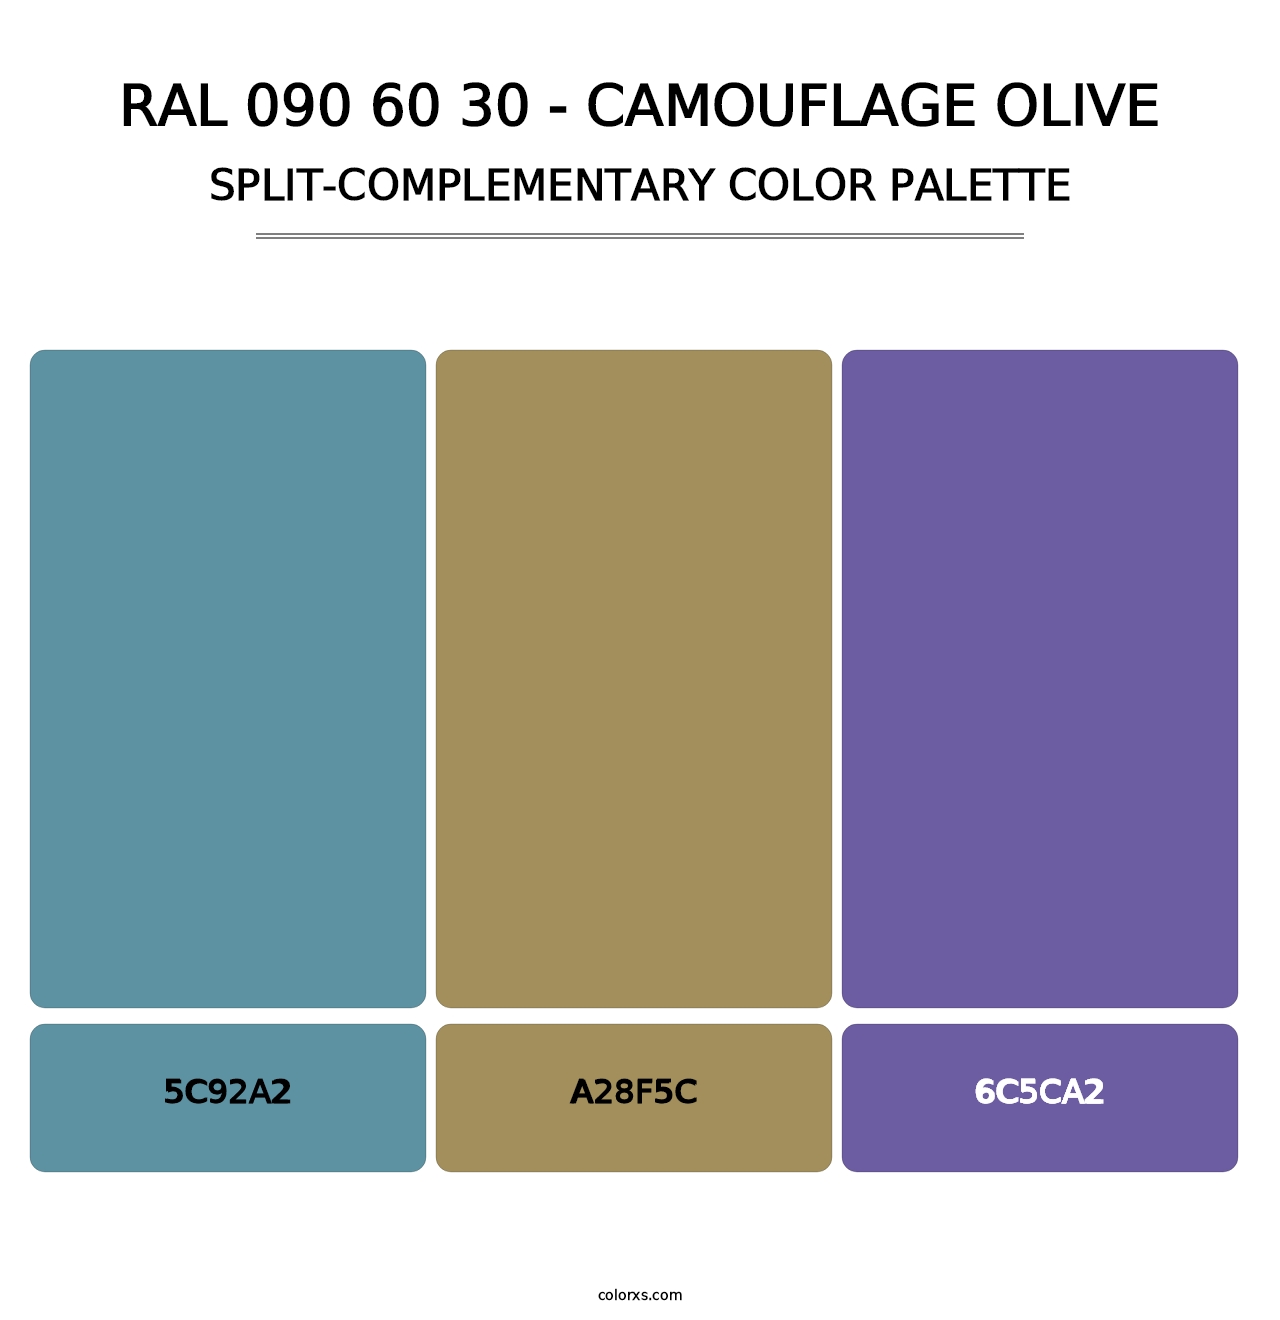 RAL 090 60 30 - Camouflage Olive - Split-Complementary Color Palette